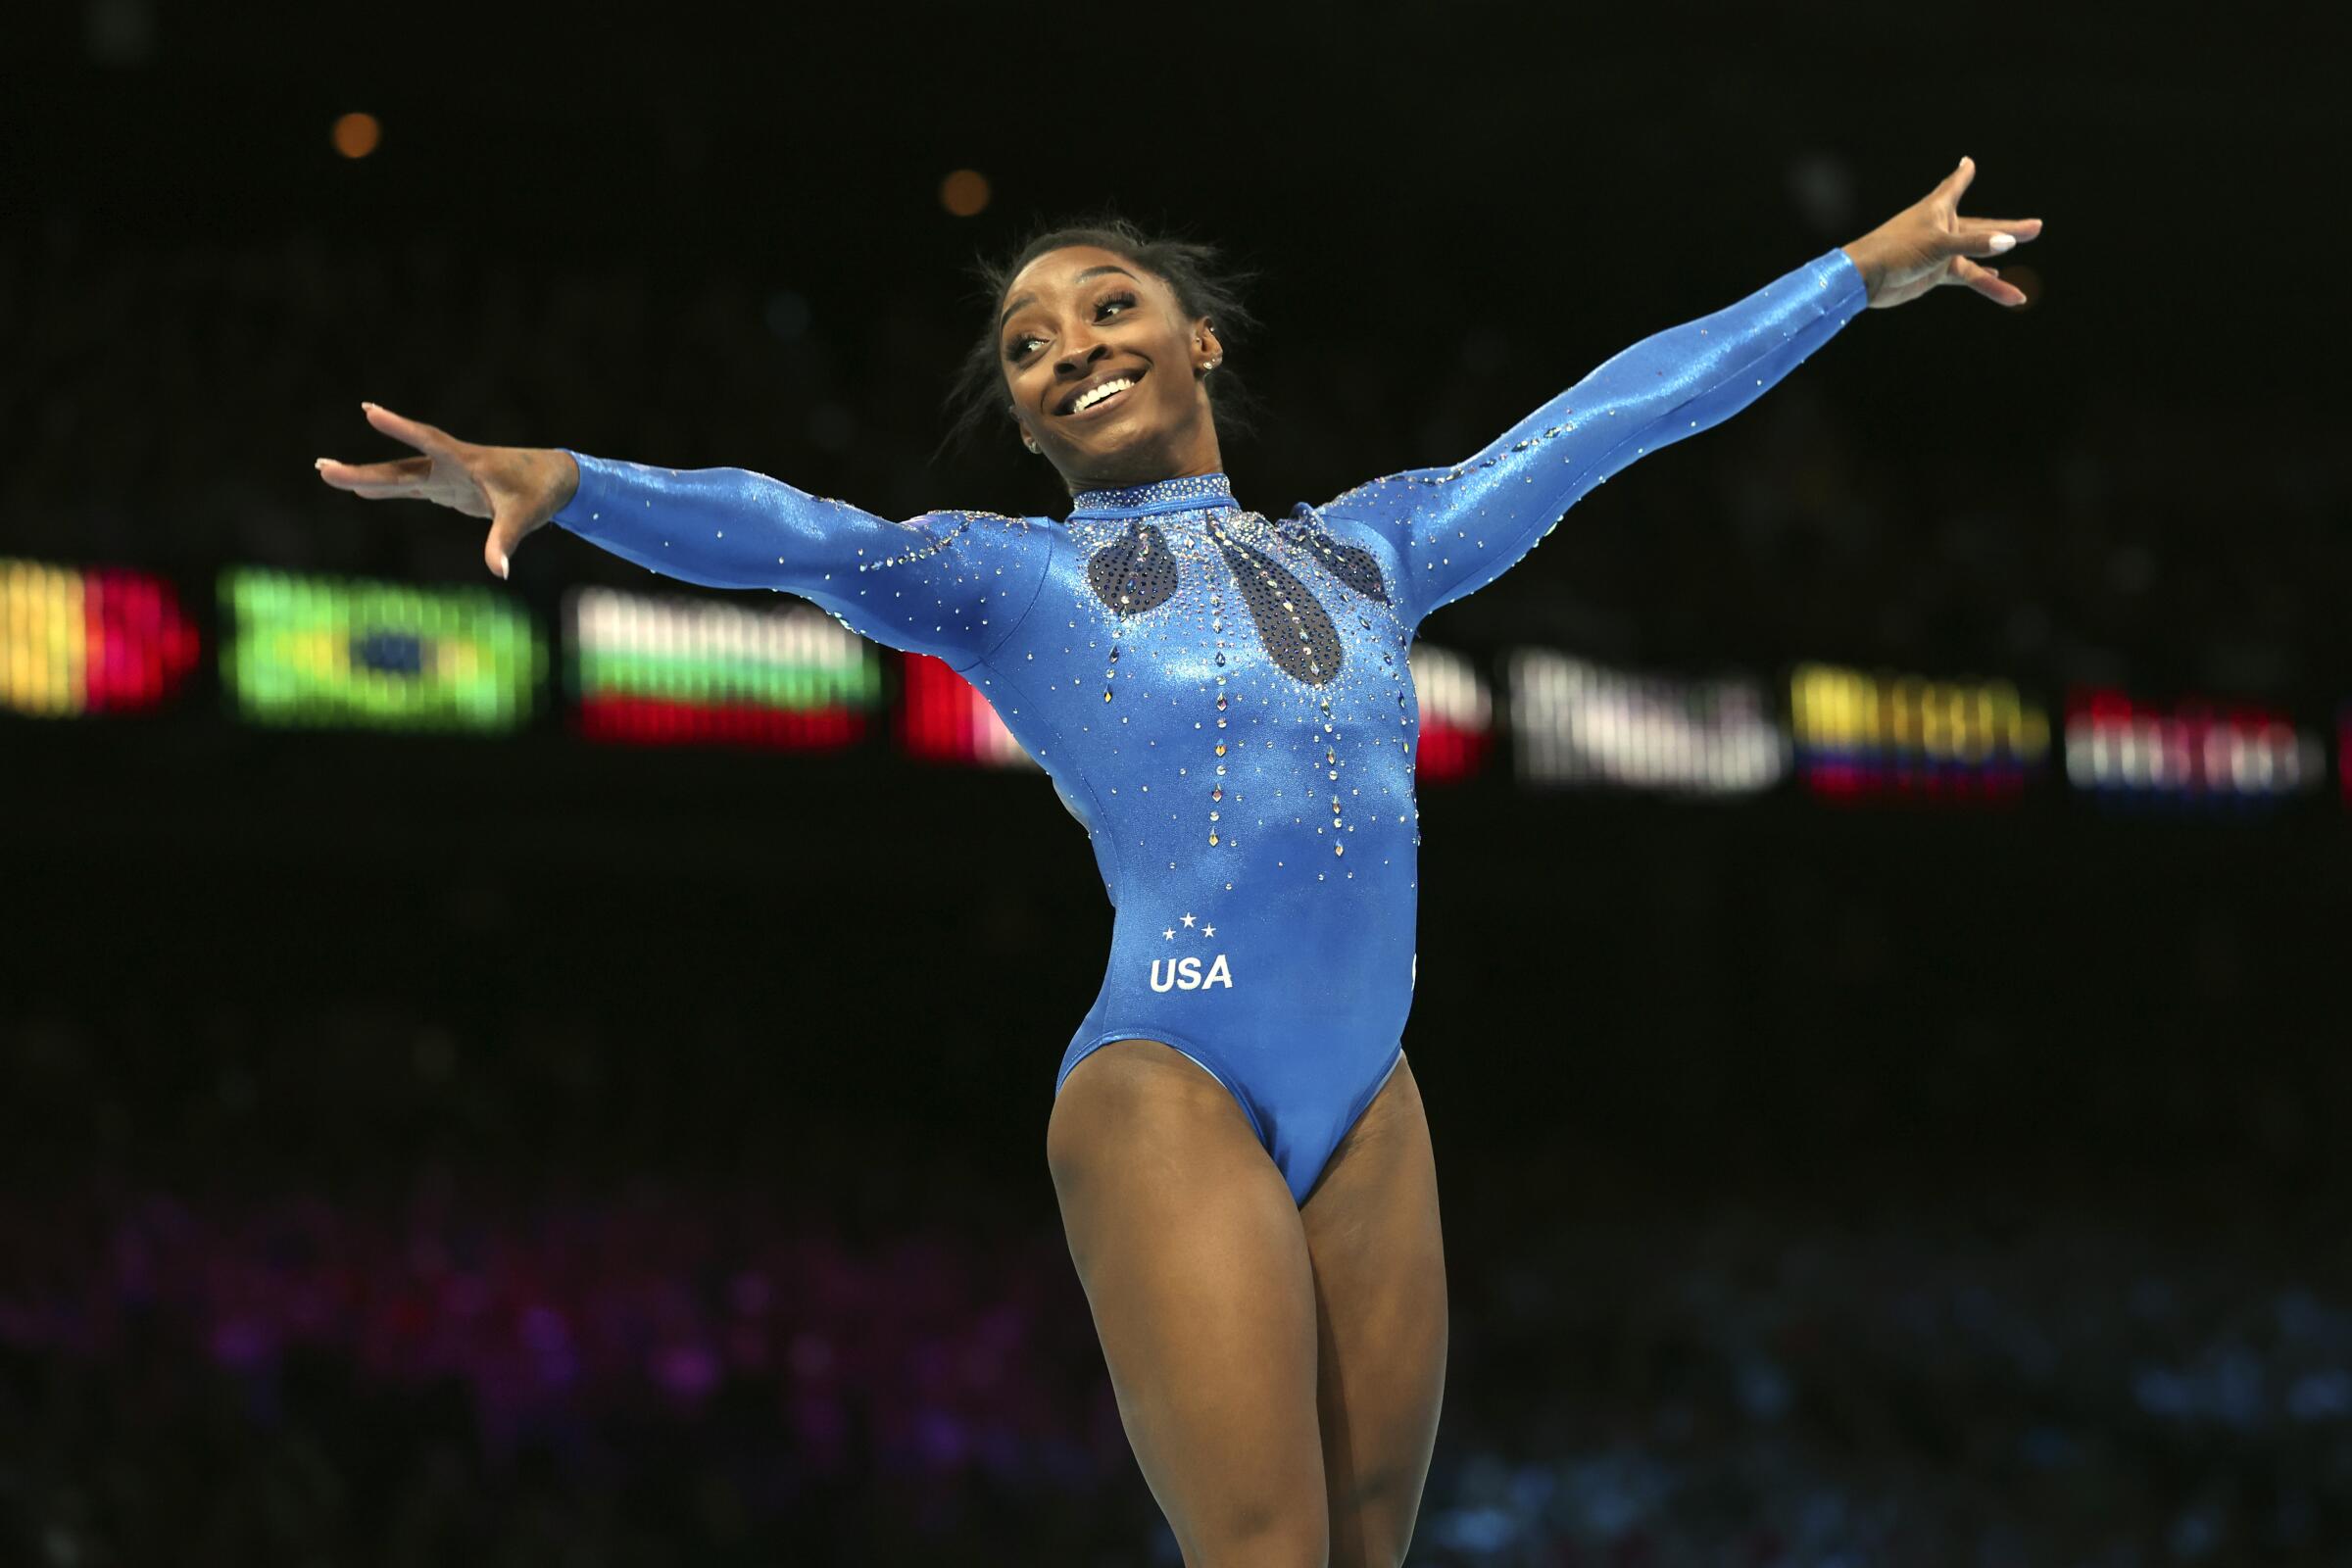 Simone Biles celebrates after winning gold in the women's all-around final at the gymnastics world championships in Belgium.